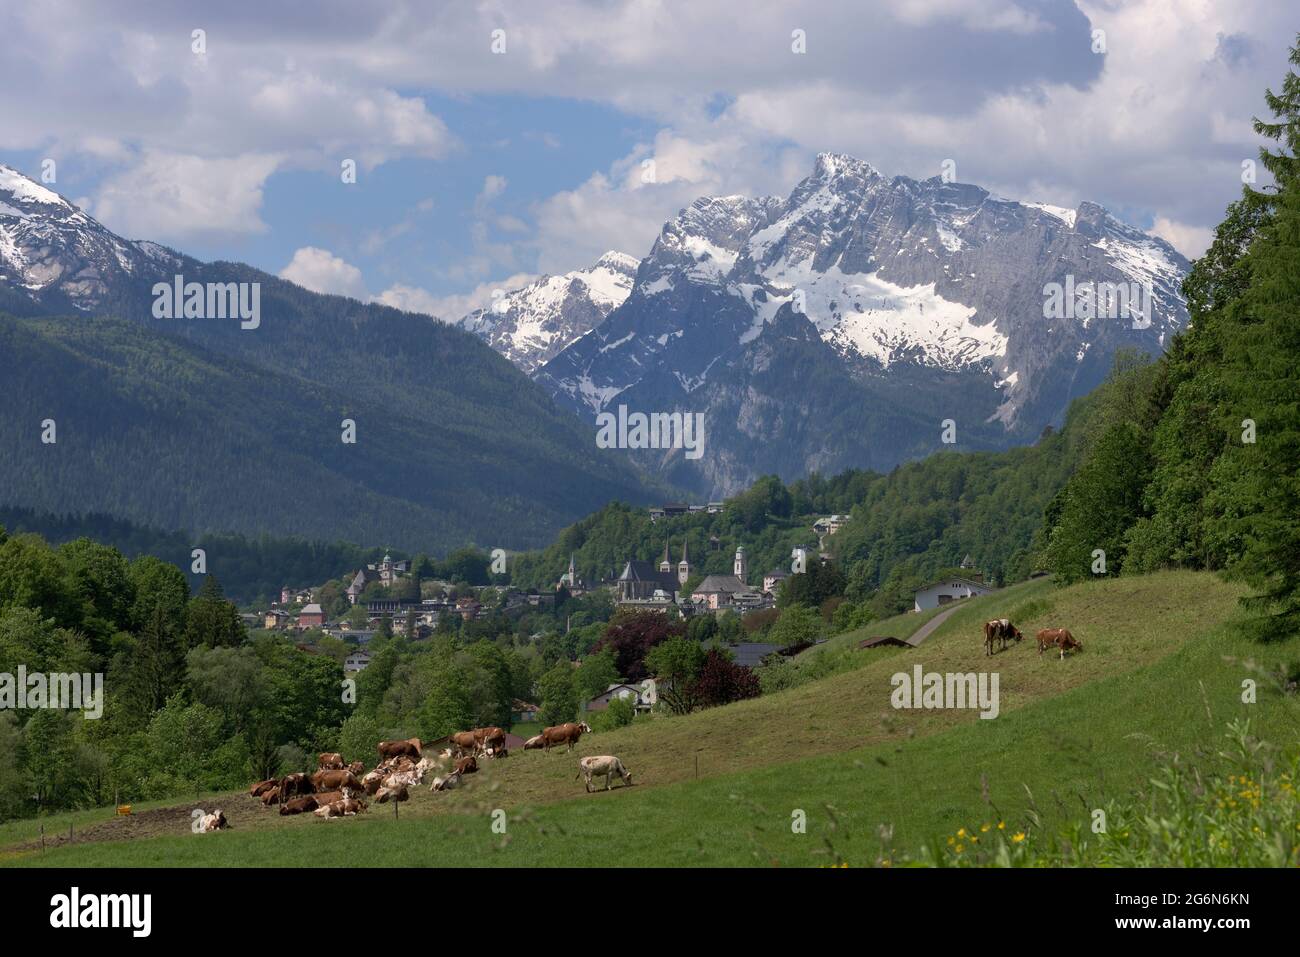 View of feeding cows, Berchtesgaden town and Hochkalter mountain, Berchtesgaden, Bavaria, Germany Stock Photo